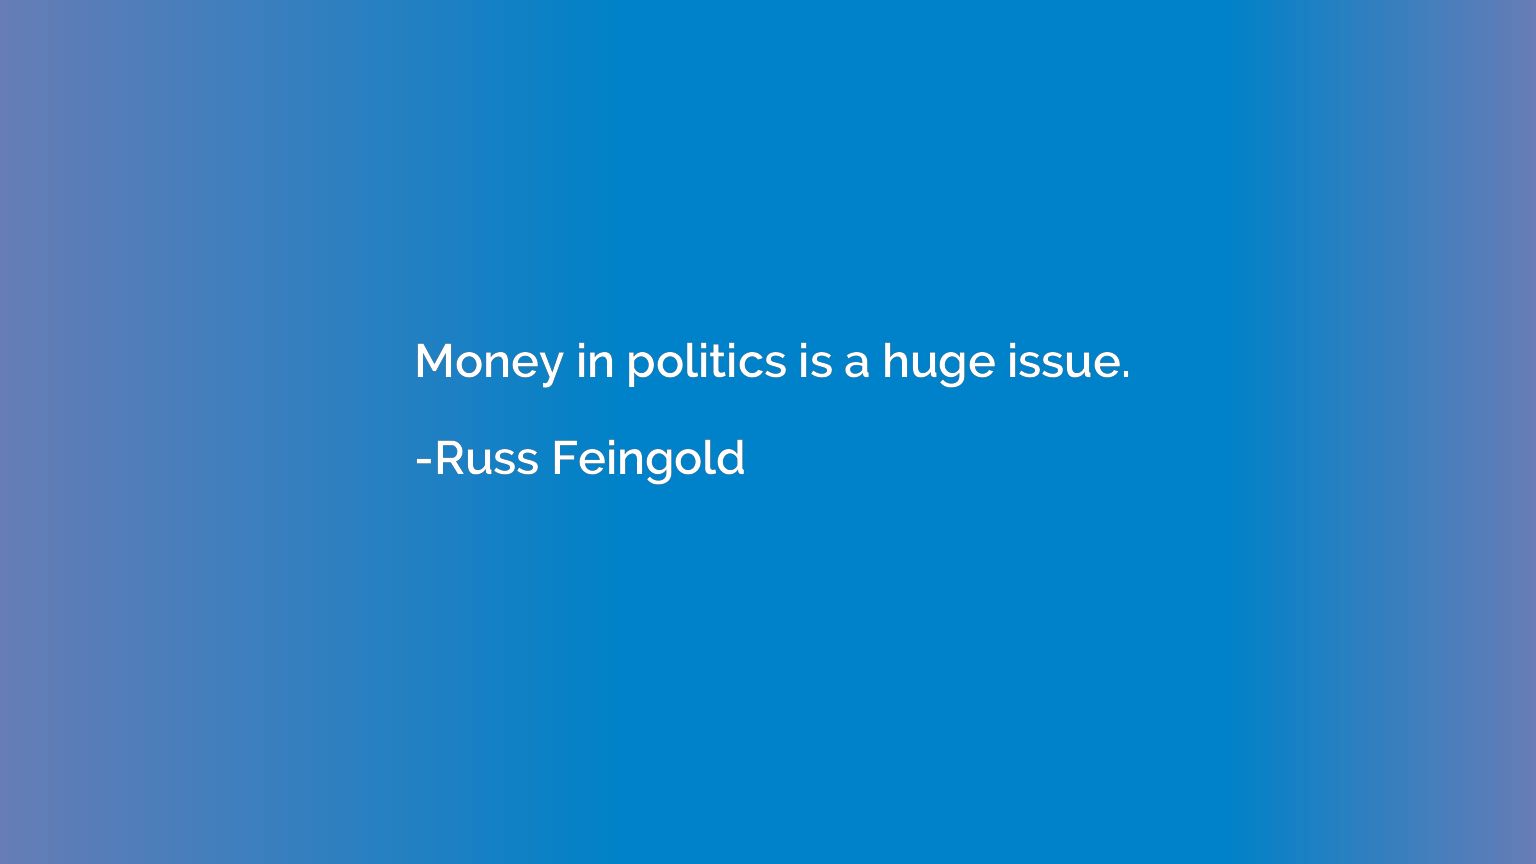 Money in politics is a huge issue.